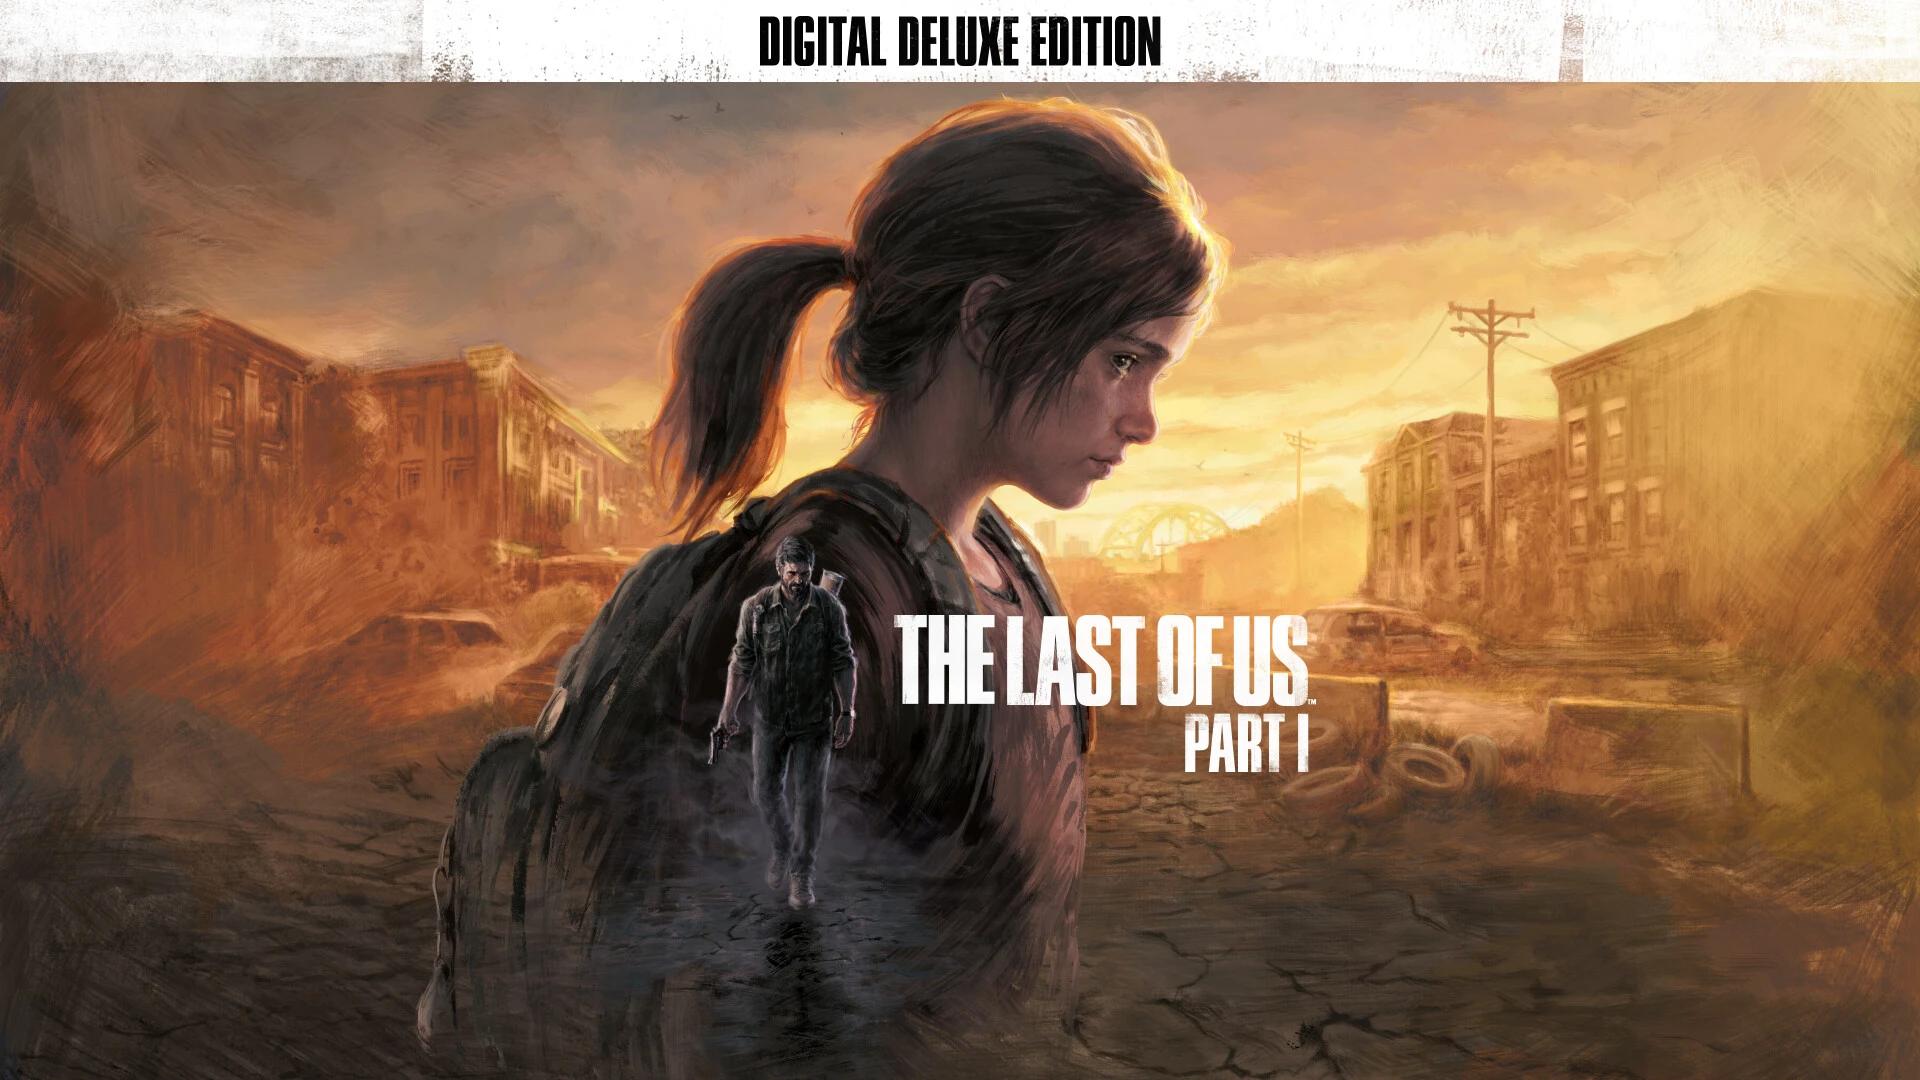 https://media.imgcdn.org/repo/2023/07/the-last-of-us-part-i-digital-deluxe-edition/64abf93b851f4-the-last-of-us-part-i-upgrade-to-digital-deluxe-edition-screenshot2.webp